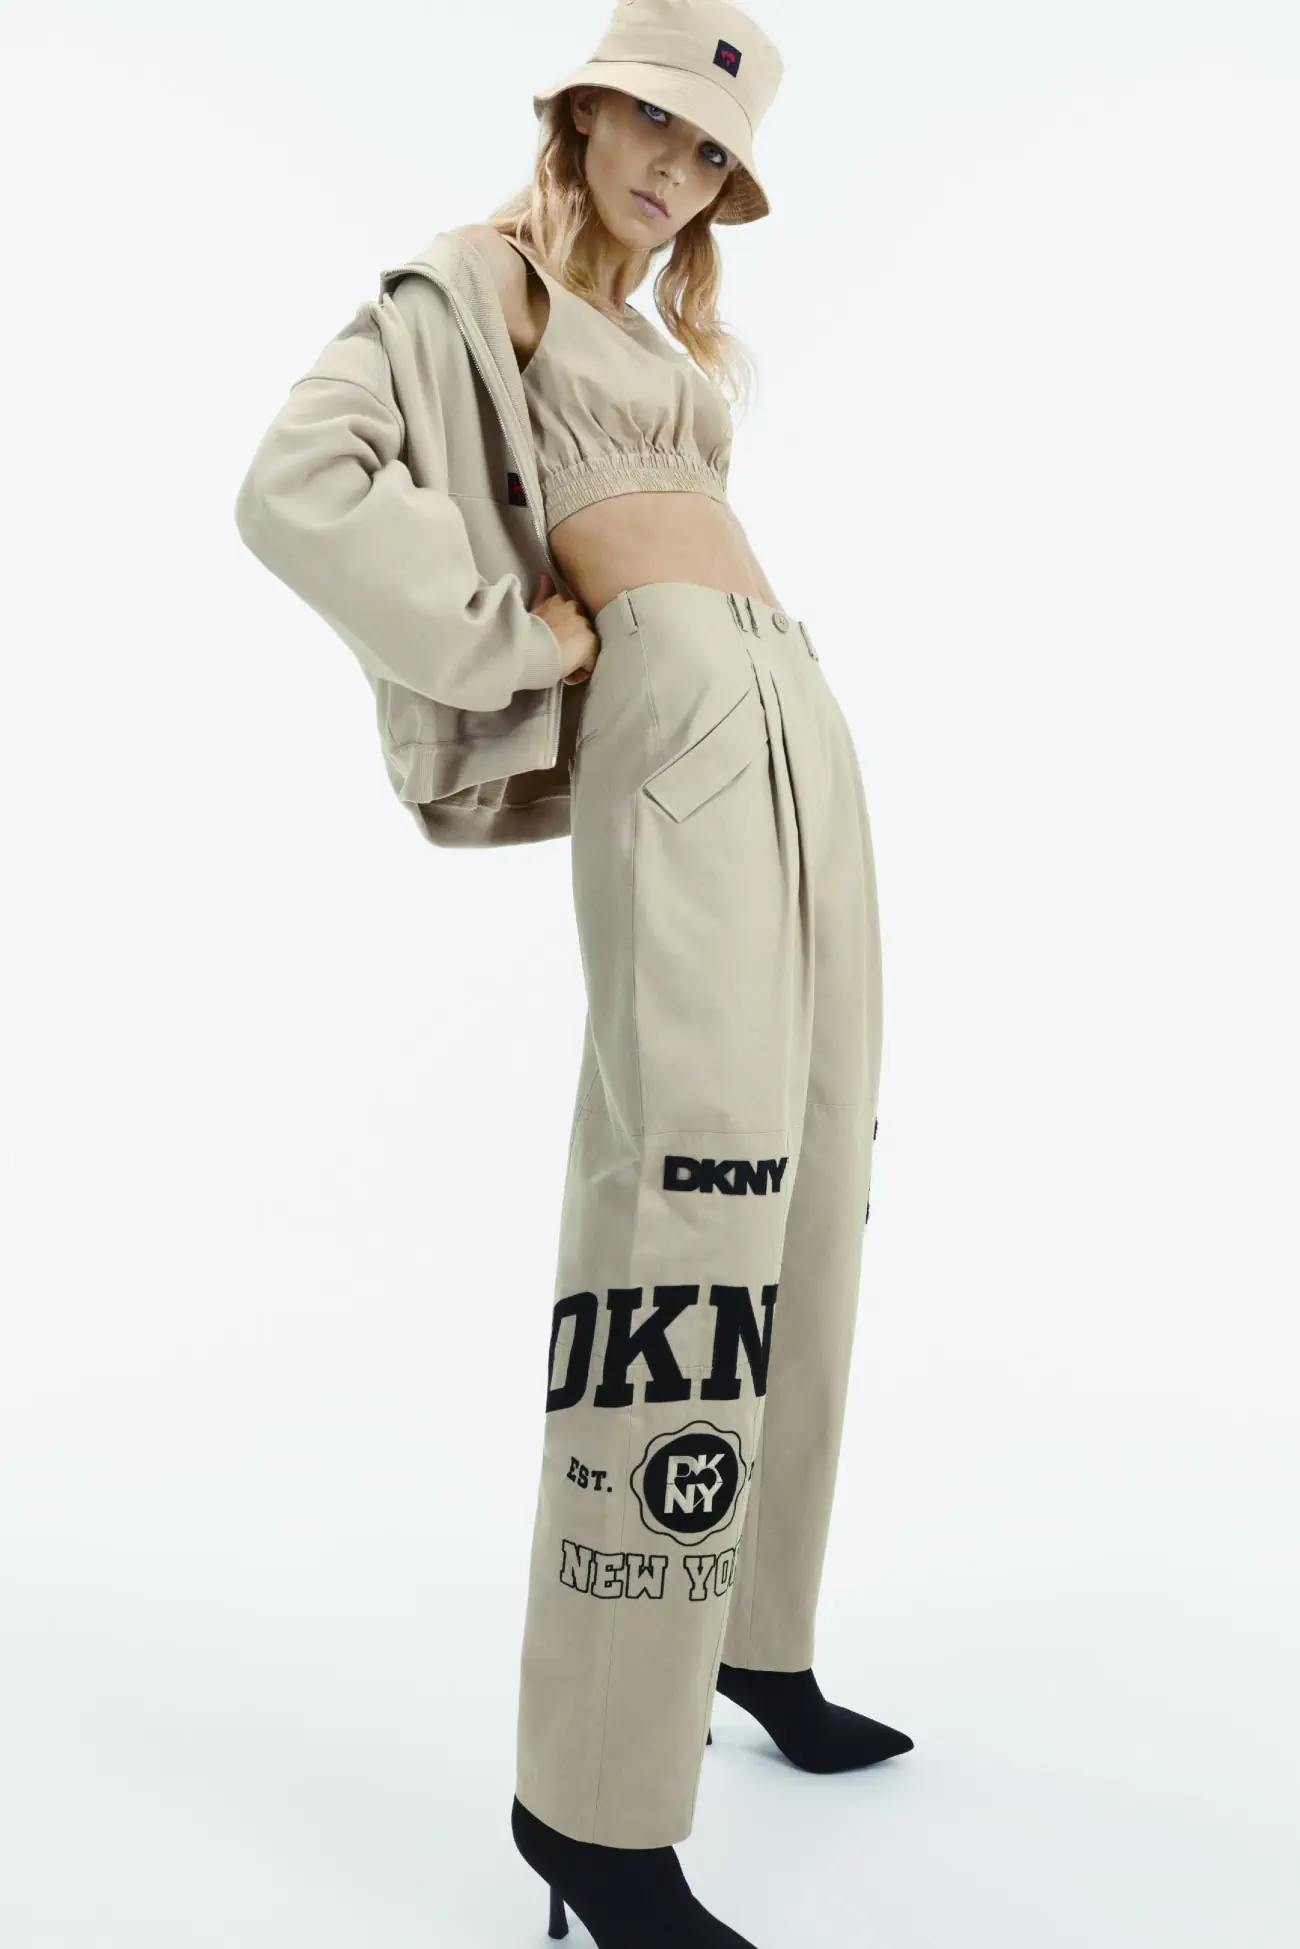 DKNY reimagines iconic logo through ''The Heart of NY Capsule''